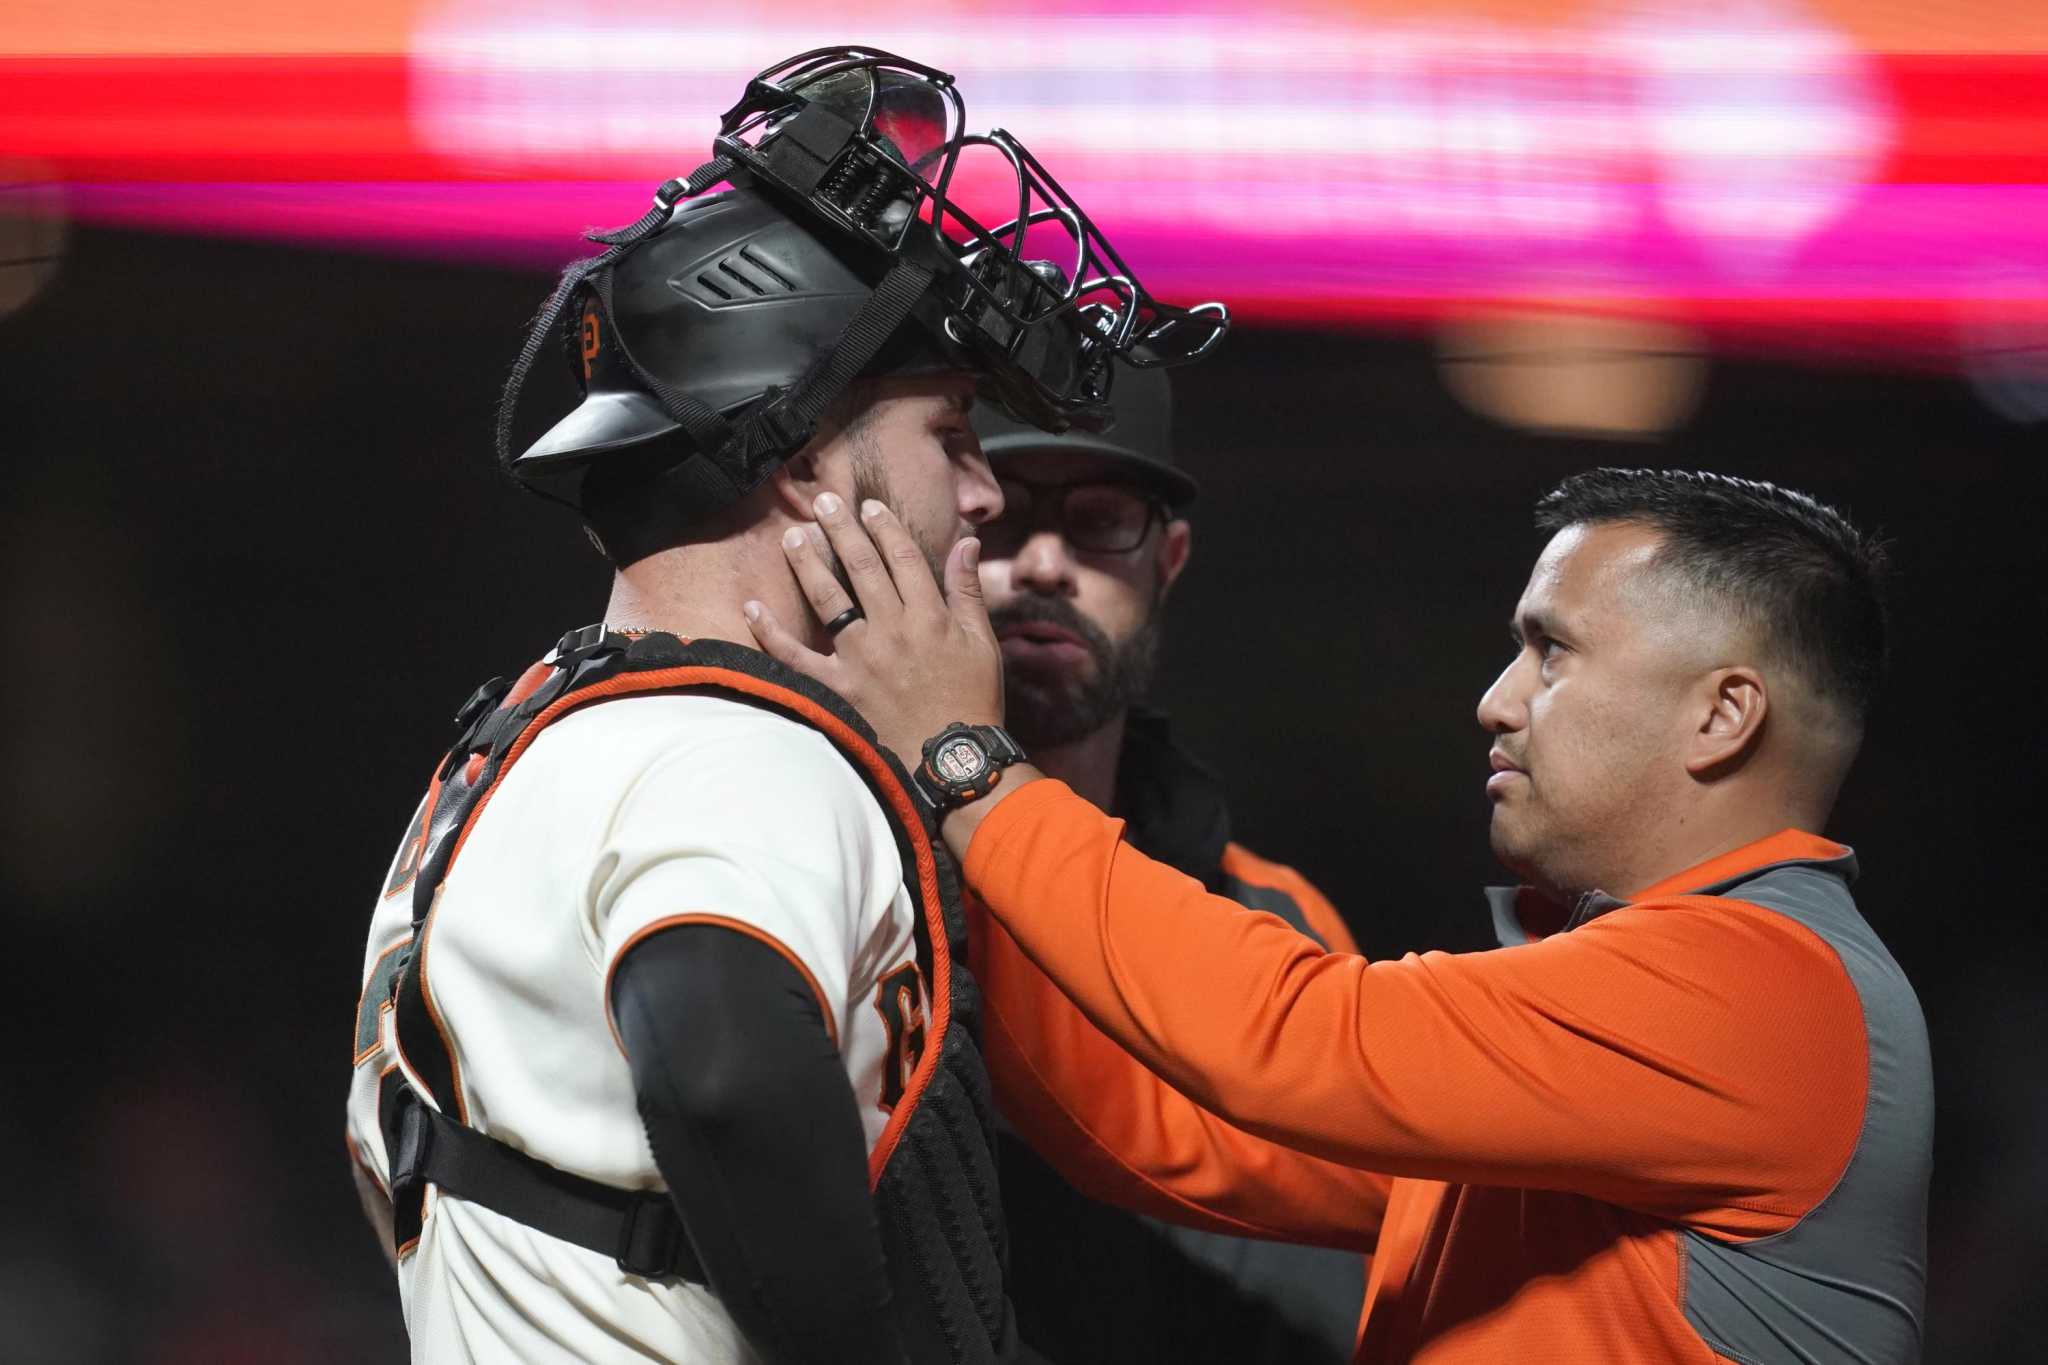 Giants catcher Joey Bart on concussion list after taking foul ball off mask